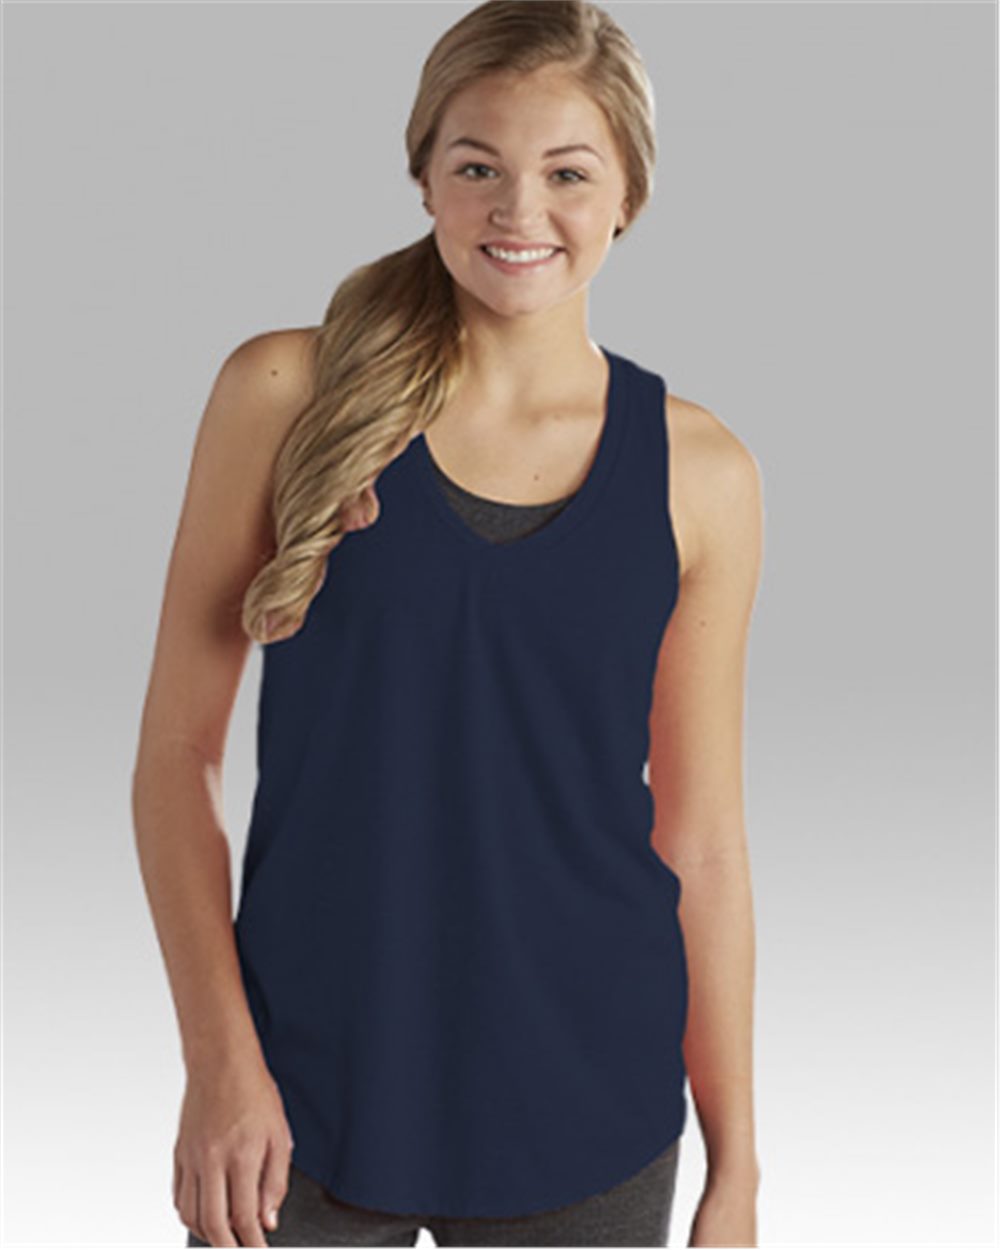 boxercraft Womens at Ease Scoopneck Tee T61-3XL Navy